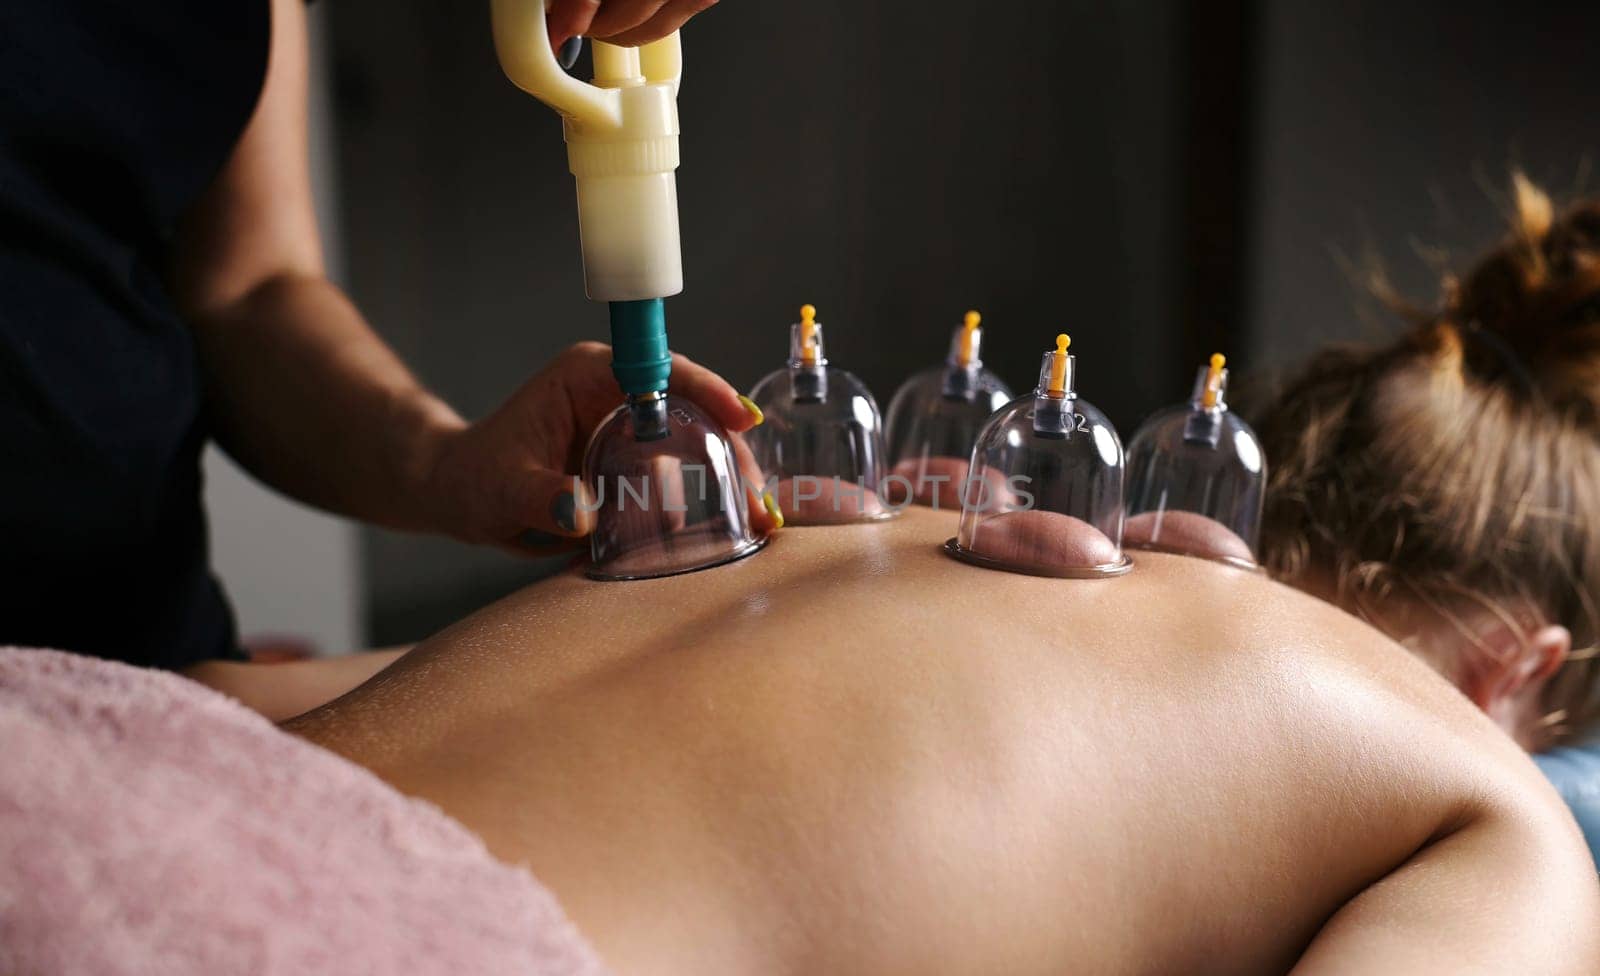 Massage Therapist Doing Back Vacuum Massage With Cups In Spa by GekaSkr